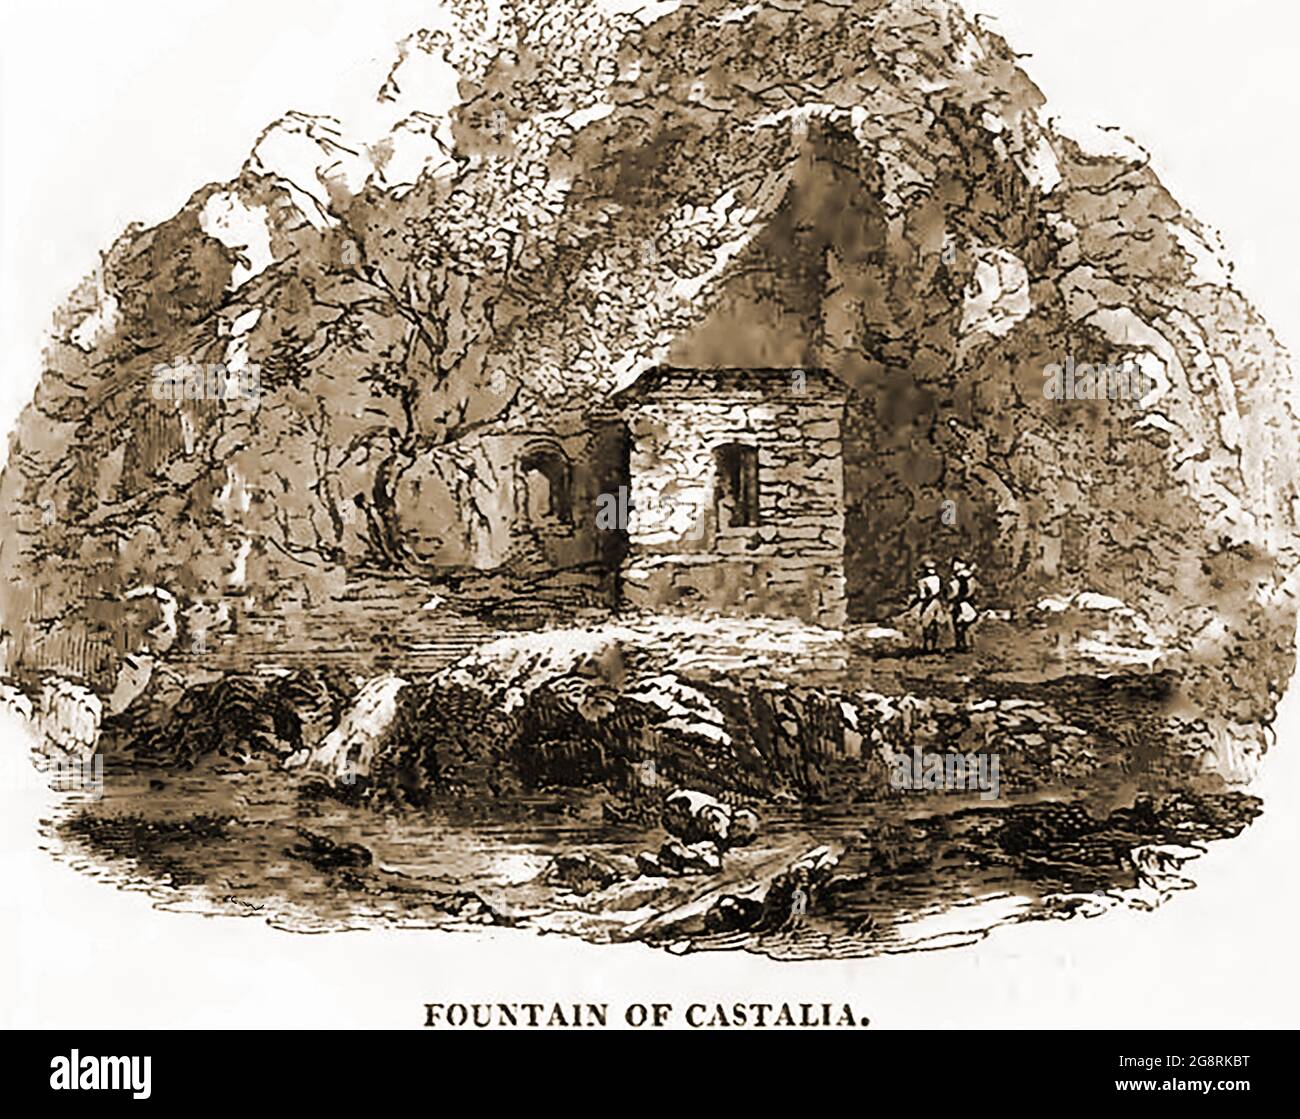 An old engraving depicting the 'Fountain of Castallana Ruins' given without description of its location.  Though there is a fountain of this name in Spain and in Sicily also, the most likely location appears to be in or near the modern entrance to the Caves of Castellana, (Grotte di Castellana) ,Italy rediscovered in 1938 by the speleologist Franco Anelli. It contains spectacular chambers known as  the She-Wolf, the Monuments, the Owl, the Little Virgin Mary, the Altar, the Precipice, the Desert Corridor, the Reverse Column, the Red Corridor, the Dome and  the White Cave. Stock Photo